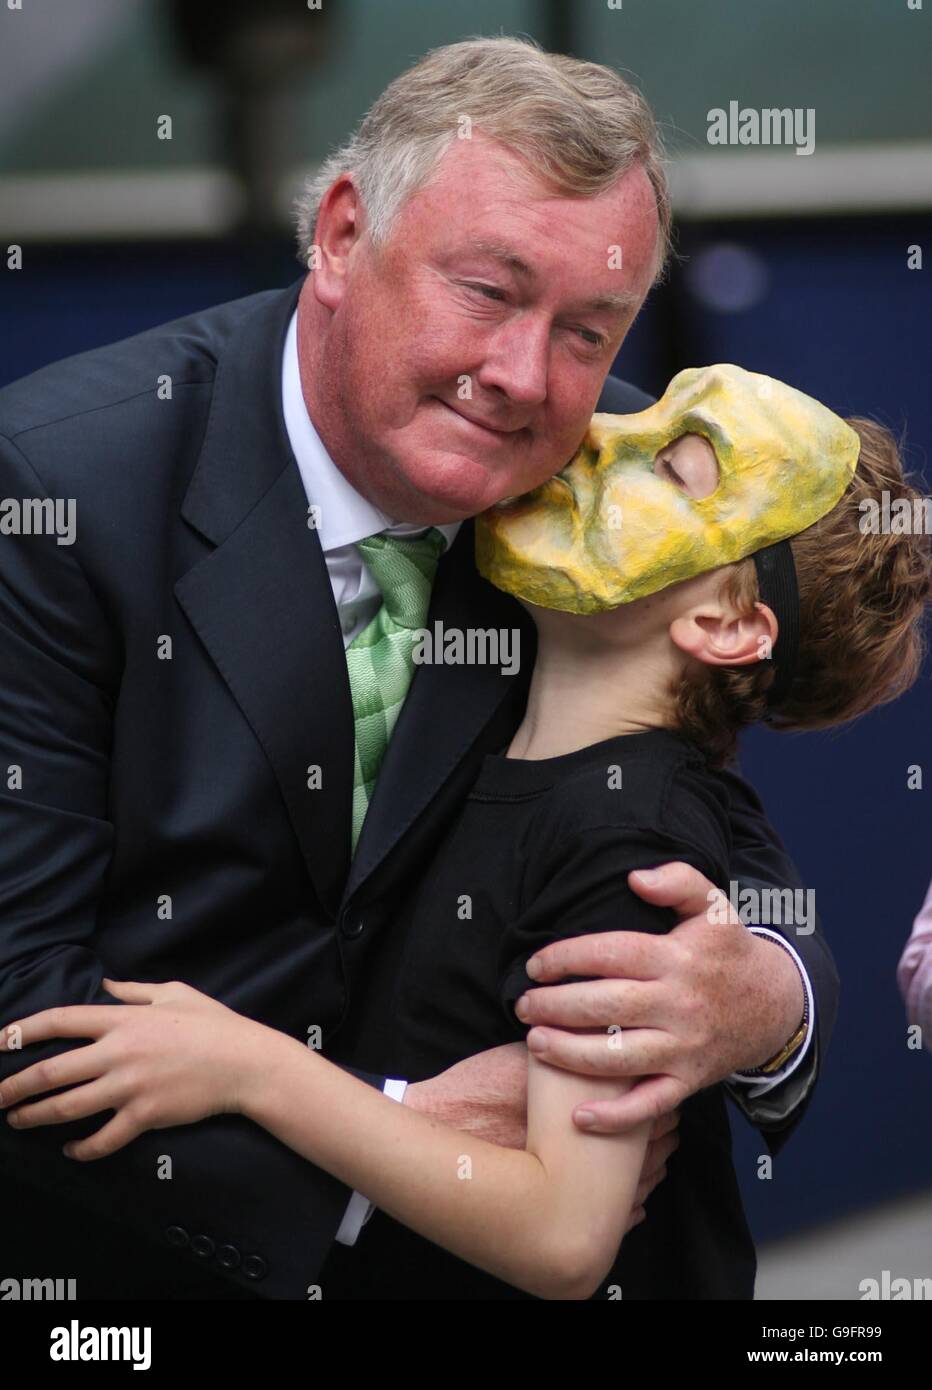 Arts minister John O'Donohuge is kissed by a member of the Gaiety school of acting at the launch of Dublin's first ever culture night at the Temple Bar Information centre in the city. PRESS ASSICIATION Photo. Picture date: Wednesday August 23, 2006. See PA story ARTS Culture Ireland. Photo credit should read: Niall Carson/PA Stock Photo